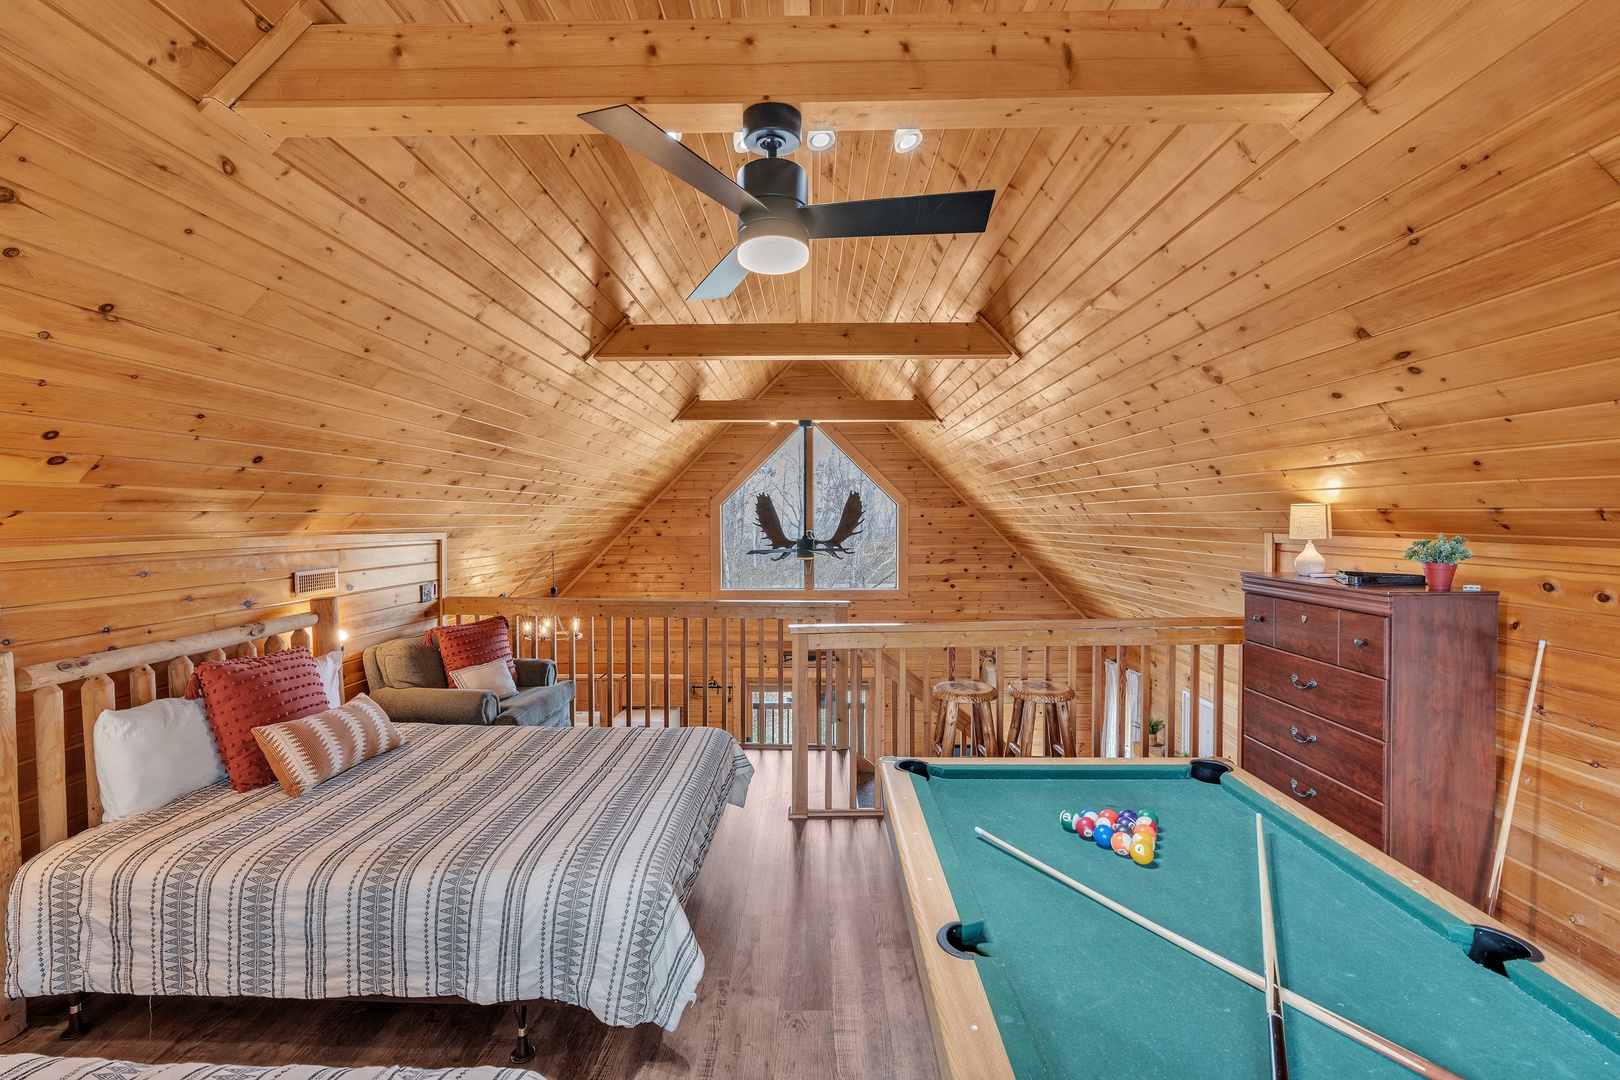 Loft with 2 full beds, pool table, and balcony